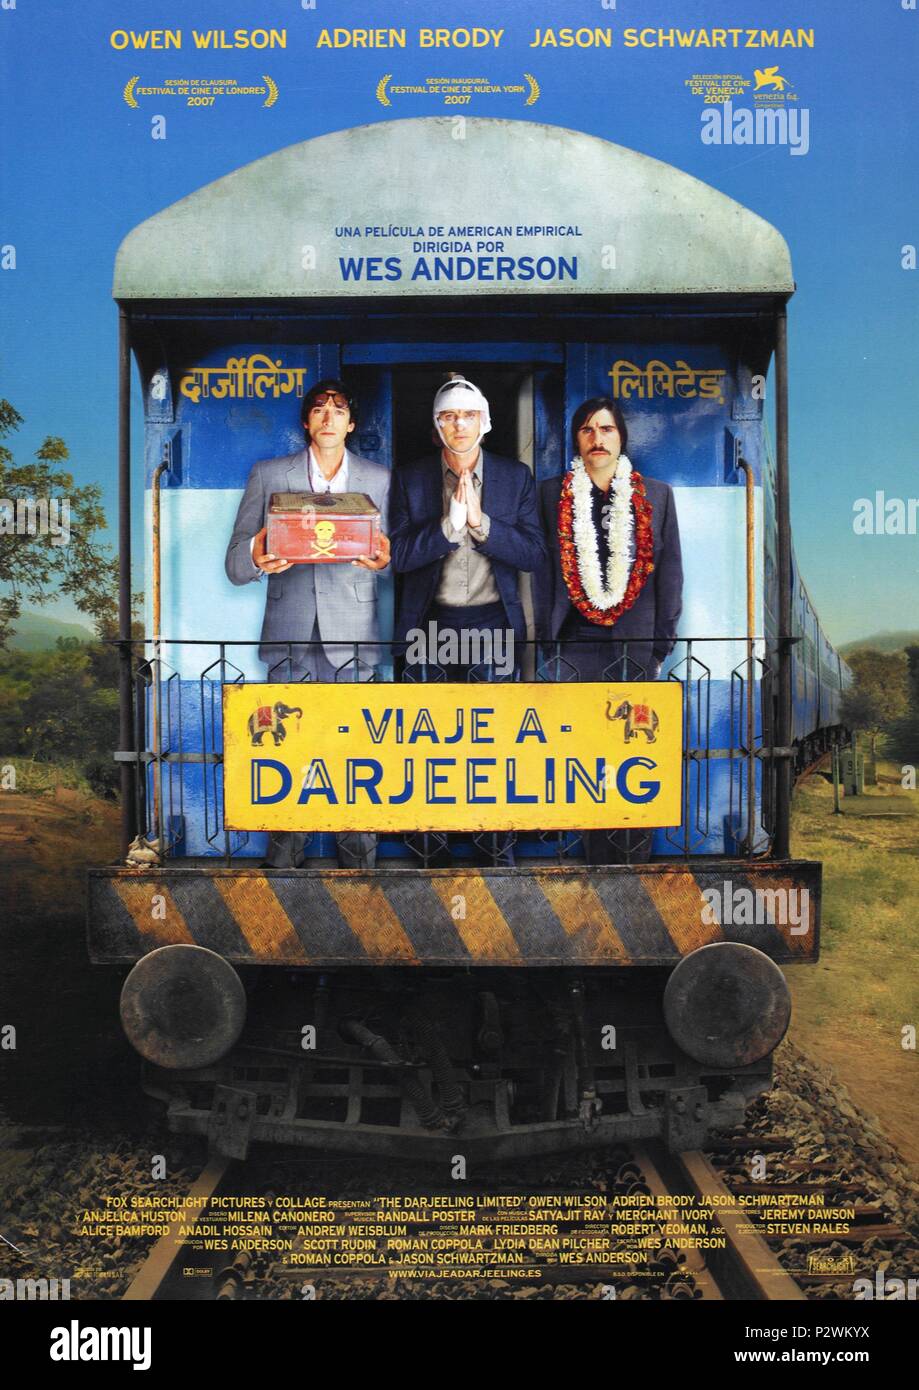 Original Film Title: THE DARJEELING LIMITED.  English Title: THE DARJEELING LIMITED.  Film Director: WES ANDERSON.  Year: 2007. Credit: AMERICAN EMPIRICAL PICTURES / Album Stock Photo